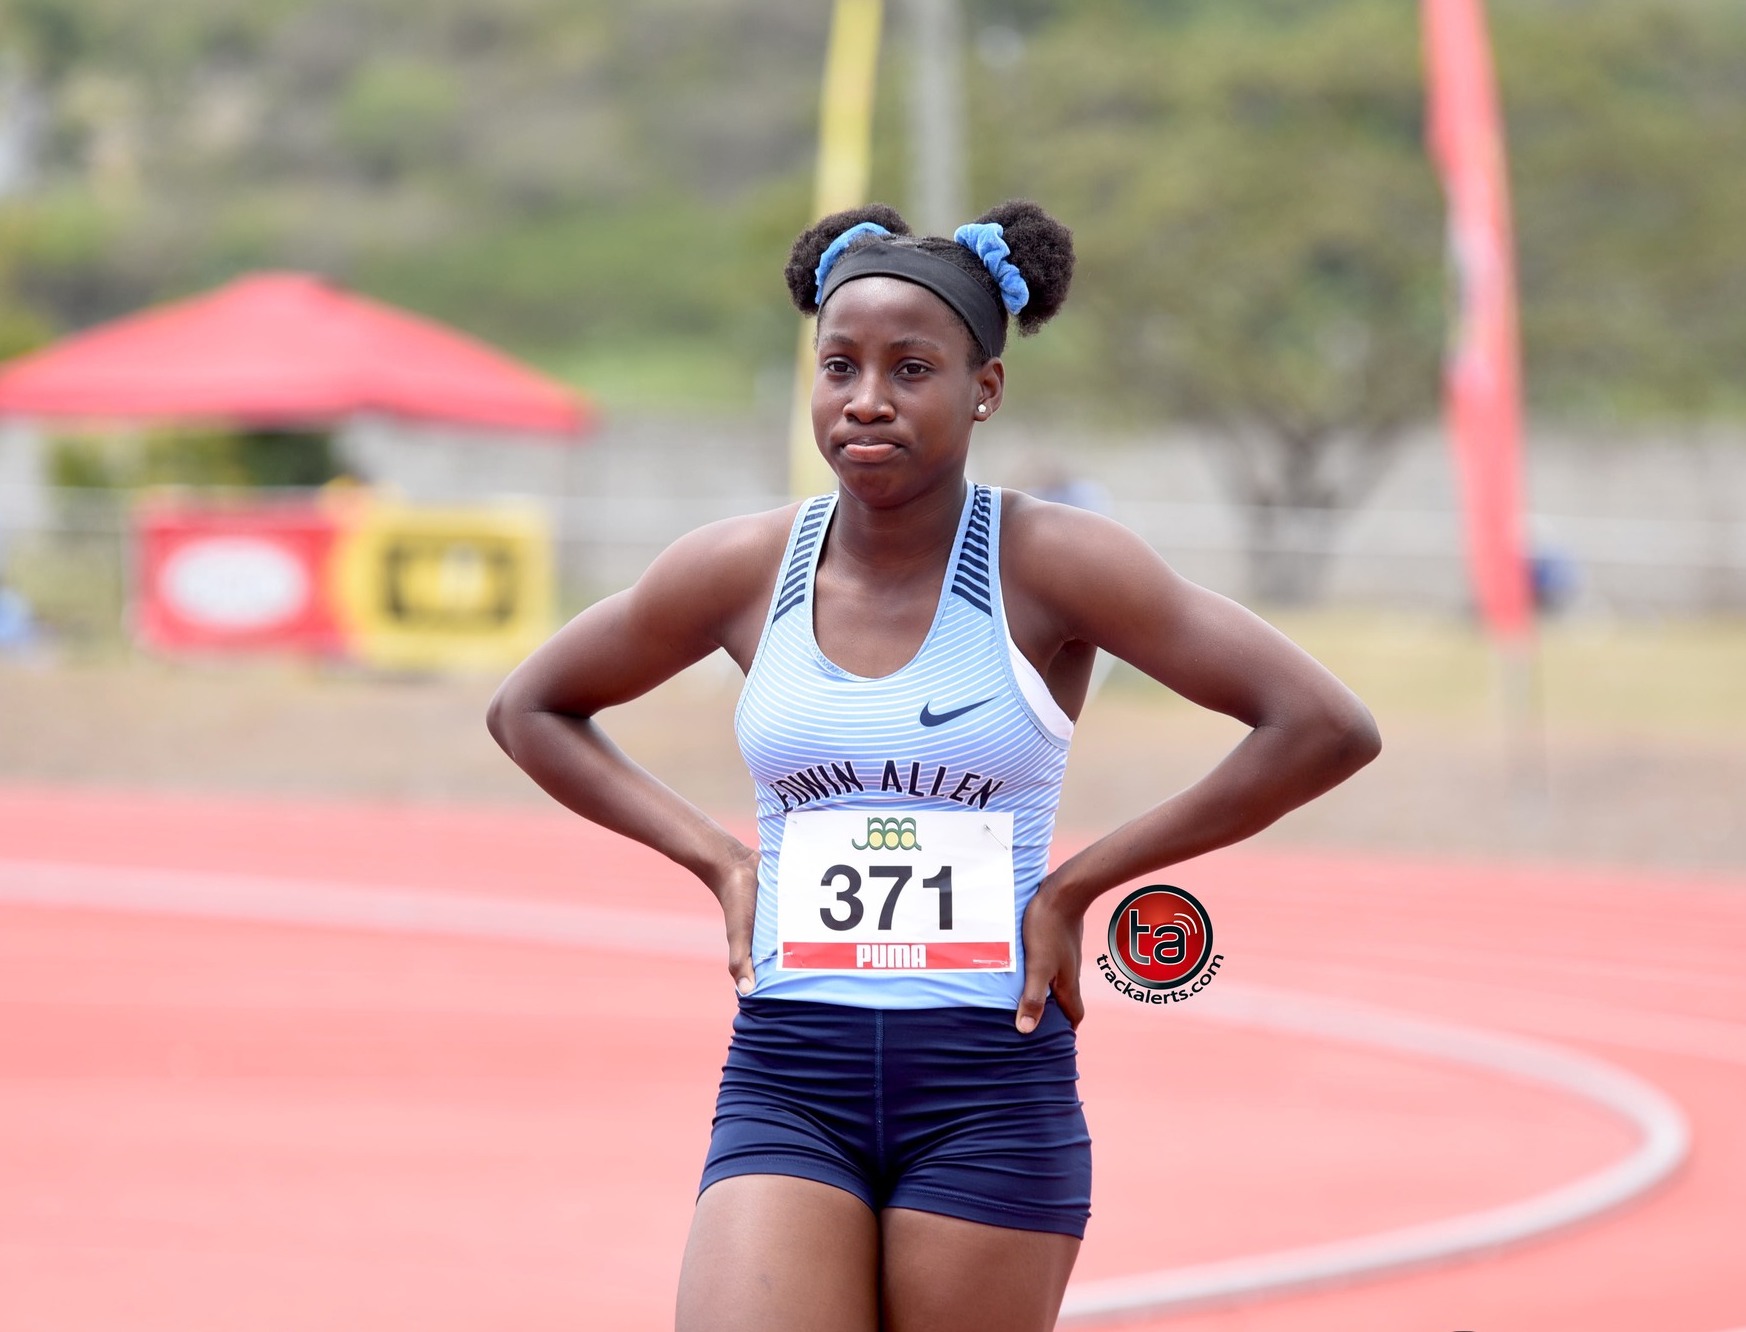 Theianna-Lee Terrelonge will represent Jamaica at the North American, Central American and Caribbean Athletics Association (NACAC) U18 - U23 Championships in Costa Rica from July 21 to 23, 2023